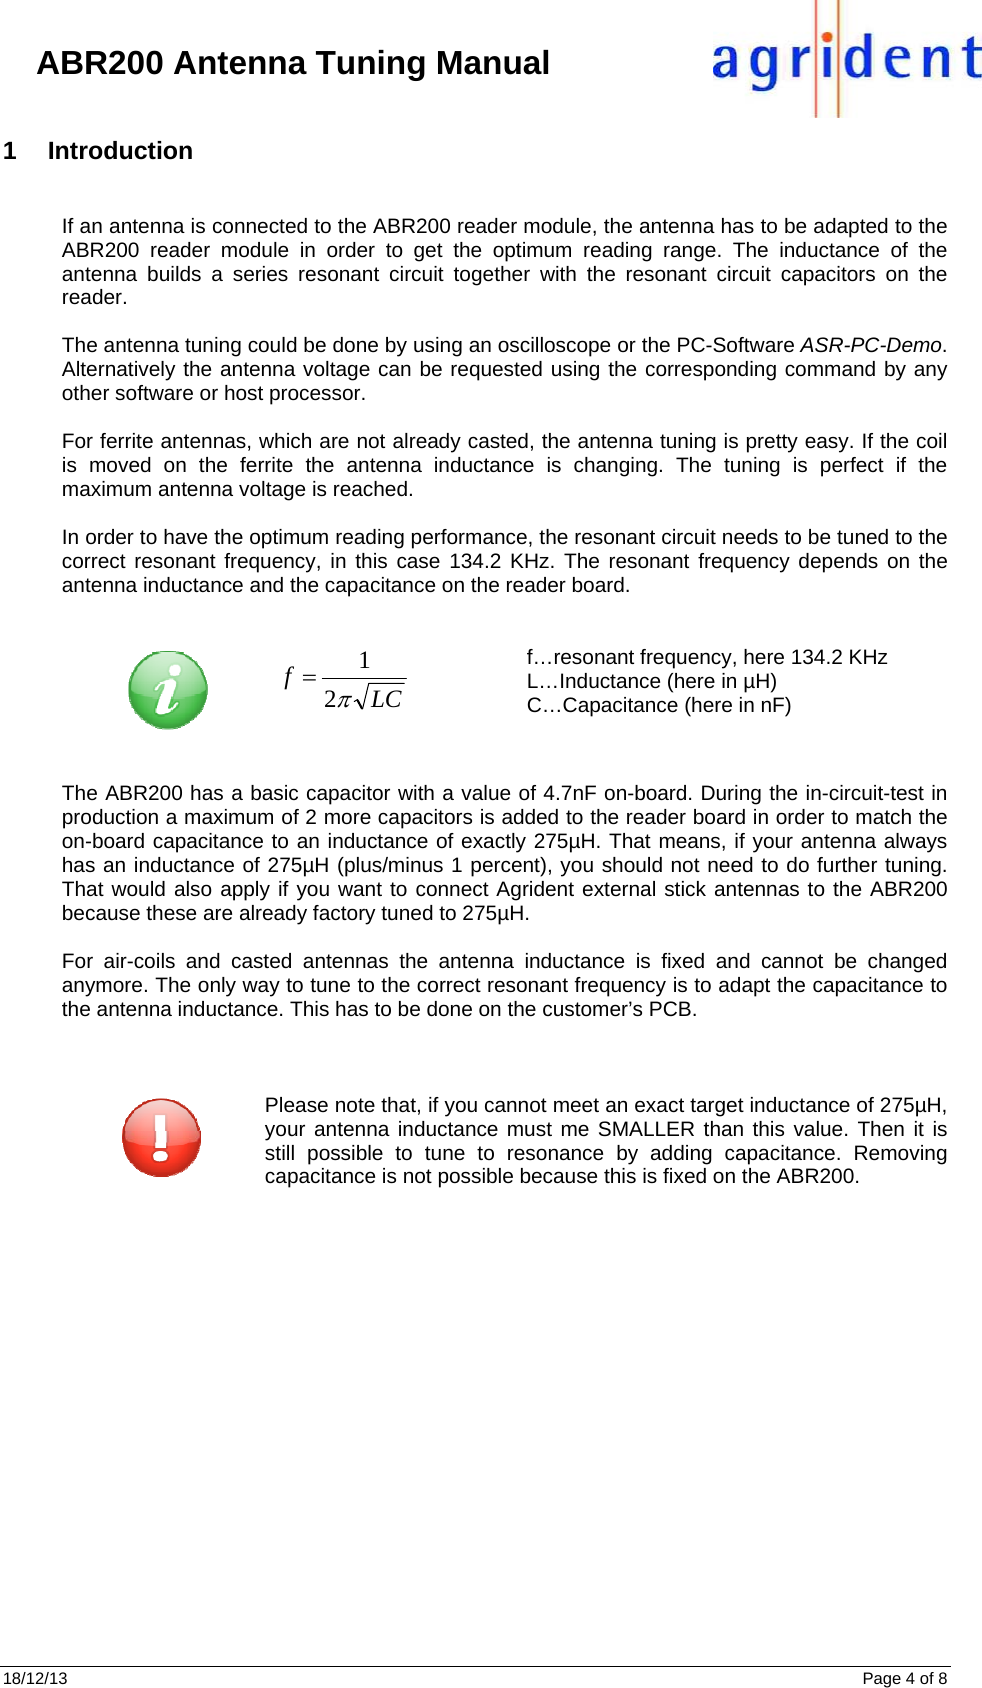 18/12/13      Page 4 of 8     ABR200 Antenna Tuning Manual 1 Introduction  If an antenna is connected to the ABR200 reader module, the antenna has to be adapted to the ABR200 reader module in order to get the optimum reading range. The inductance of the antenna builds a series resonant circuit together with the resonant circuit capacitors on the reader.   The antenna tuning could be done by using an oscilloscope or the PC-Software ASR-PC-Demo. Alternatively the antenna voltage can be requested using the corresponding command by any other software or host processor.  For ferrite antennas, which are not already casted, the antenna tuning is pretty easy. If the coil is moved on the ferrite the antenna inductance is changing. The tuning is perfect if the maximum antenna voltage is reached.   In order to have the optimum reading performance, the resonant circuit needs to be tuned to the correct resonant frequency, in this case 134.2 KHz. The resonant frequency depends on the antenna inductance and the capacitance on the reader board.   LCf21 f…resonant frequency, here 134.2 KHz L…Inductance (here in µH) C…Capacitance (here in nF)   The ABR200 has a basic capacitor with a value of 4.7nF on-board. During the in-circuit-test in production a maximum of 2 more capacitors is added to the reader board in order to match the on-board capacitance to an inductance of exactly 275µH. That means, if your antenna always has an inductance of 275µH (plus/minus 1 percent), you should not need to do further tuning. That would also apply if you want to connect Agrident external stick antennas to the ABR200 because these are already factory tuned to 275µH.  For air-coils and casted antennas the antenna inductance is fixed and cannot be changed anymore. The only way to tune to the correct resonant frequency is to adapt the capacitance to the antenna inductance. This has to be done on the customer’s PCB.               Please note that, if you cannot meet an exact target inductance of 275µH, your antenna inductance must me SMALLER than this value. Then it is still possible to tune to resonance by adding capacitance. Removing capacitance is not possible because this is fixed on the ABR200.     